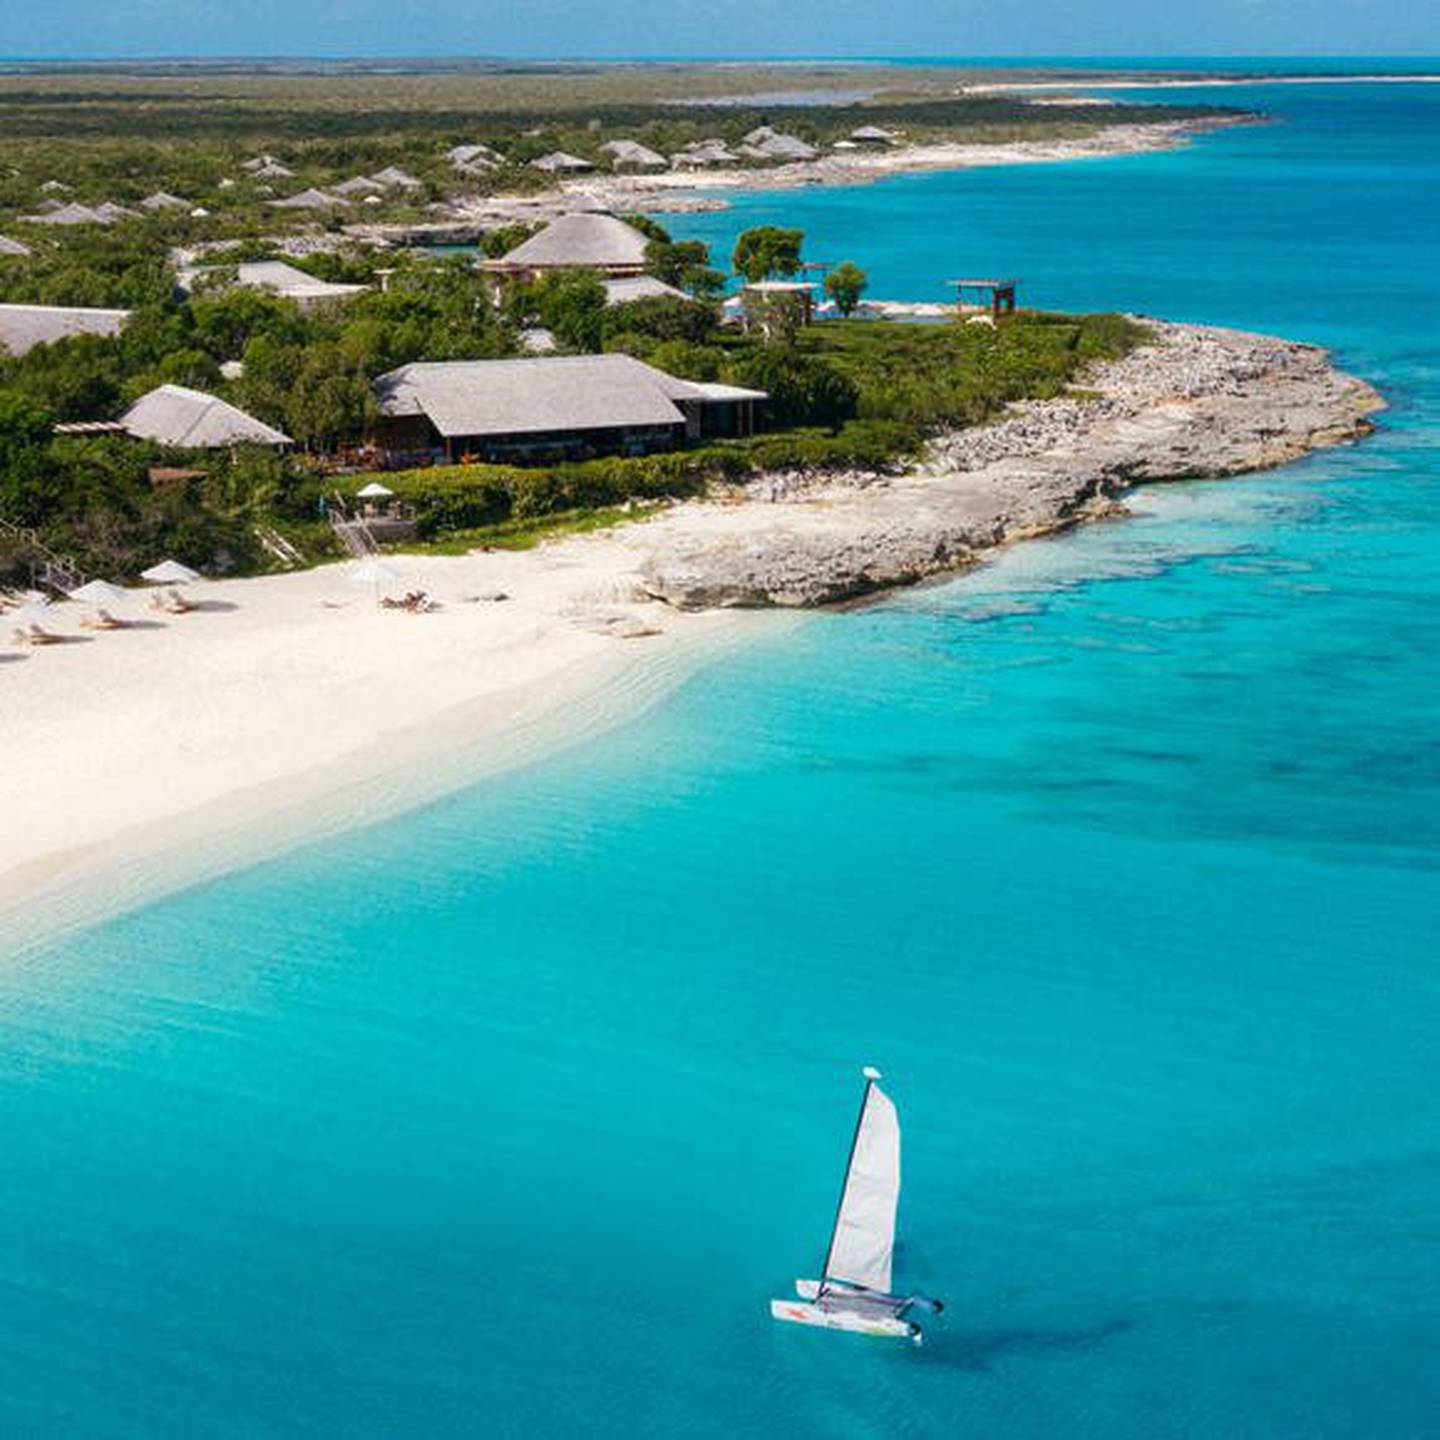 A waterfront Aman hotel in Providenciales, Turks and Caicos Islands. Photo: Aman Resorts